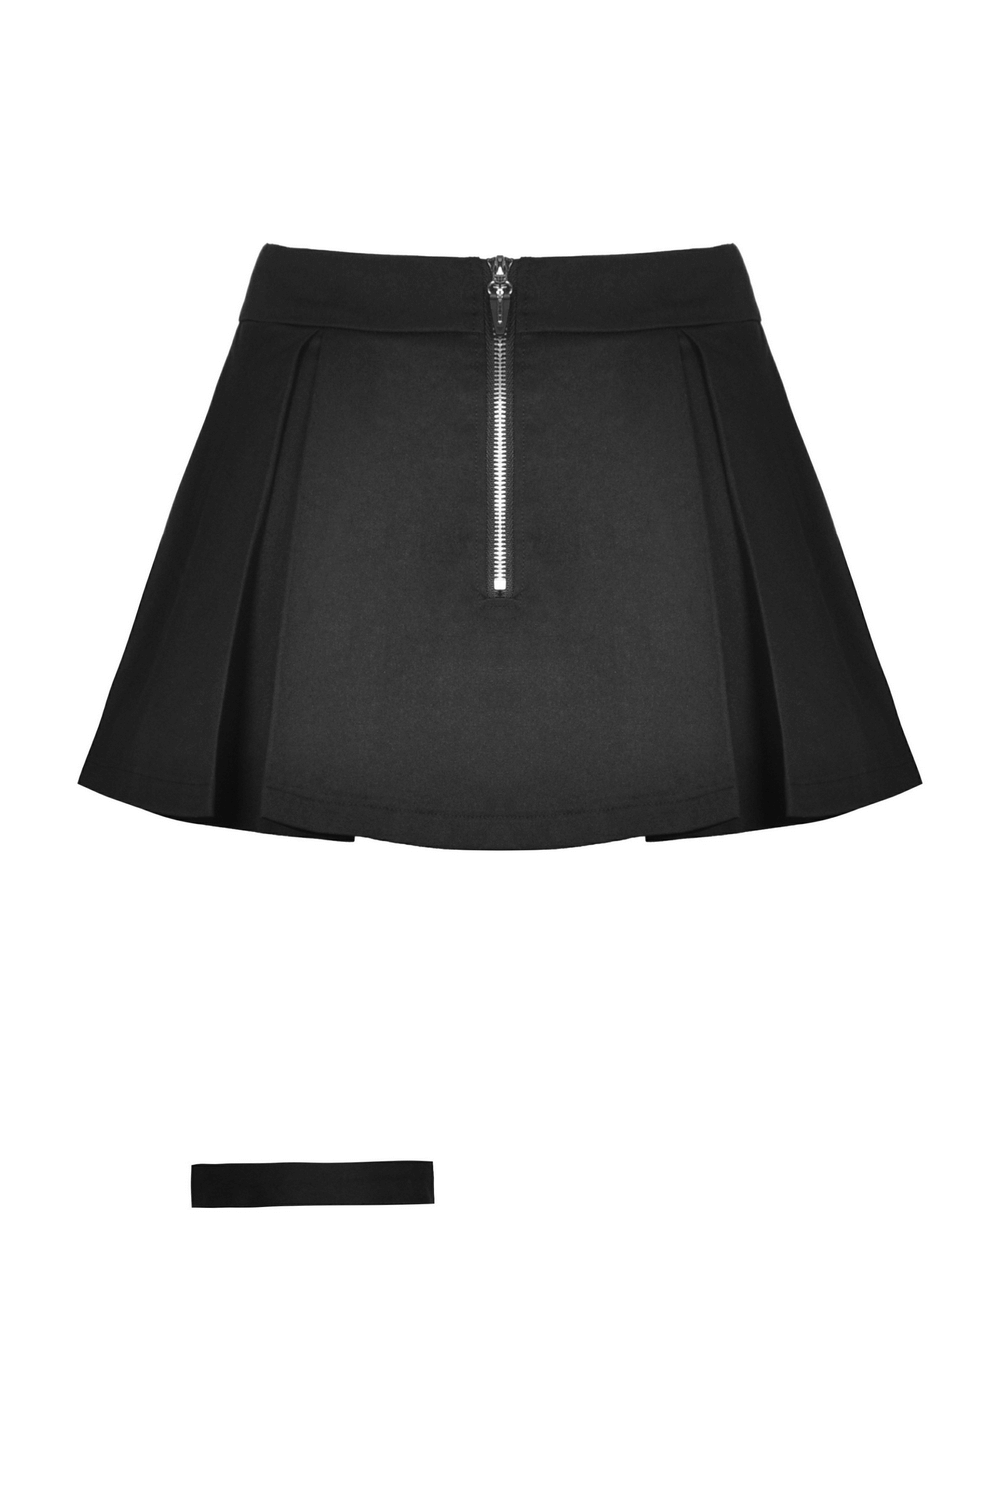 Women's Gothic Pleated Mini Skirt with Cross-Detailing